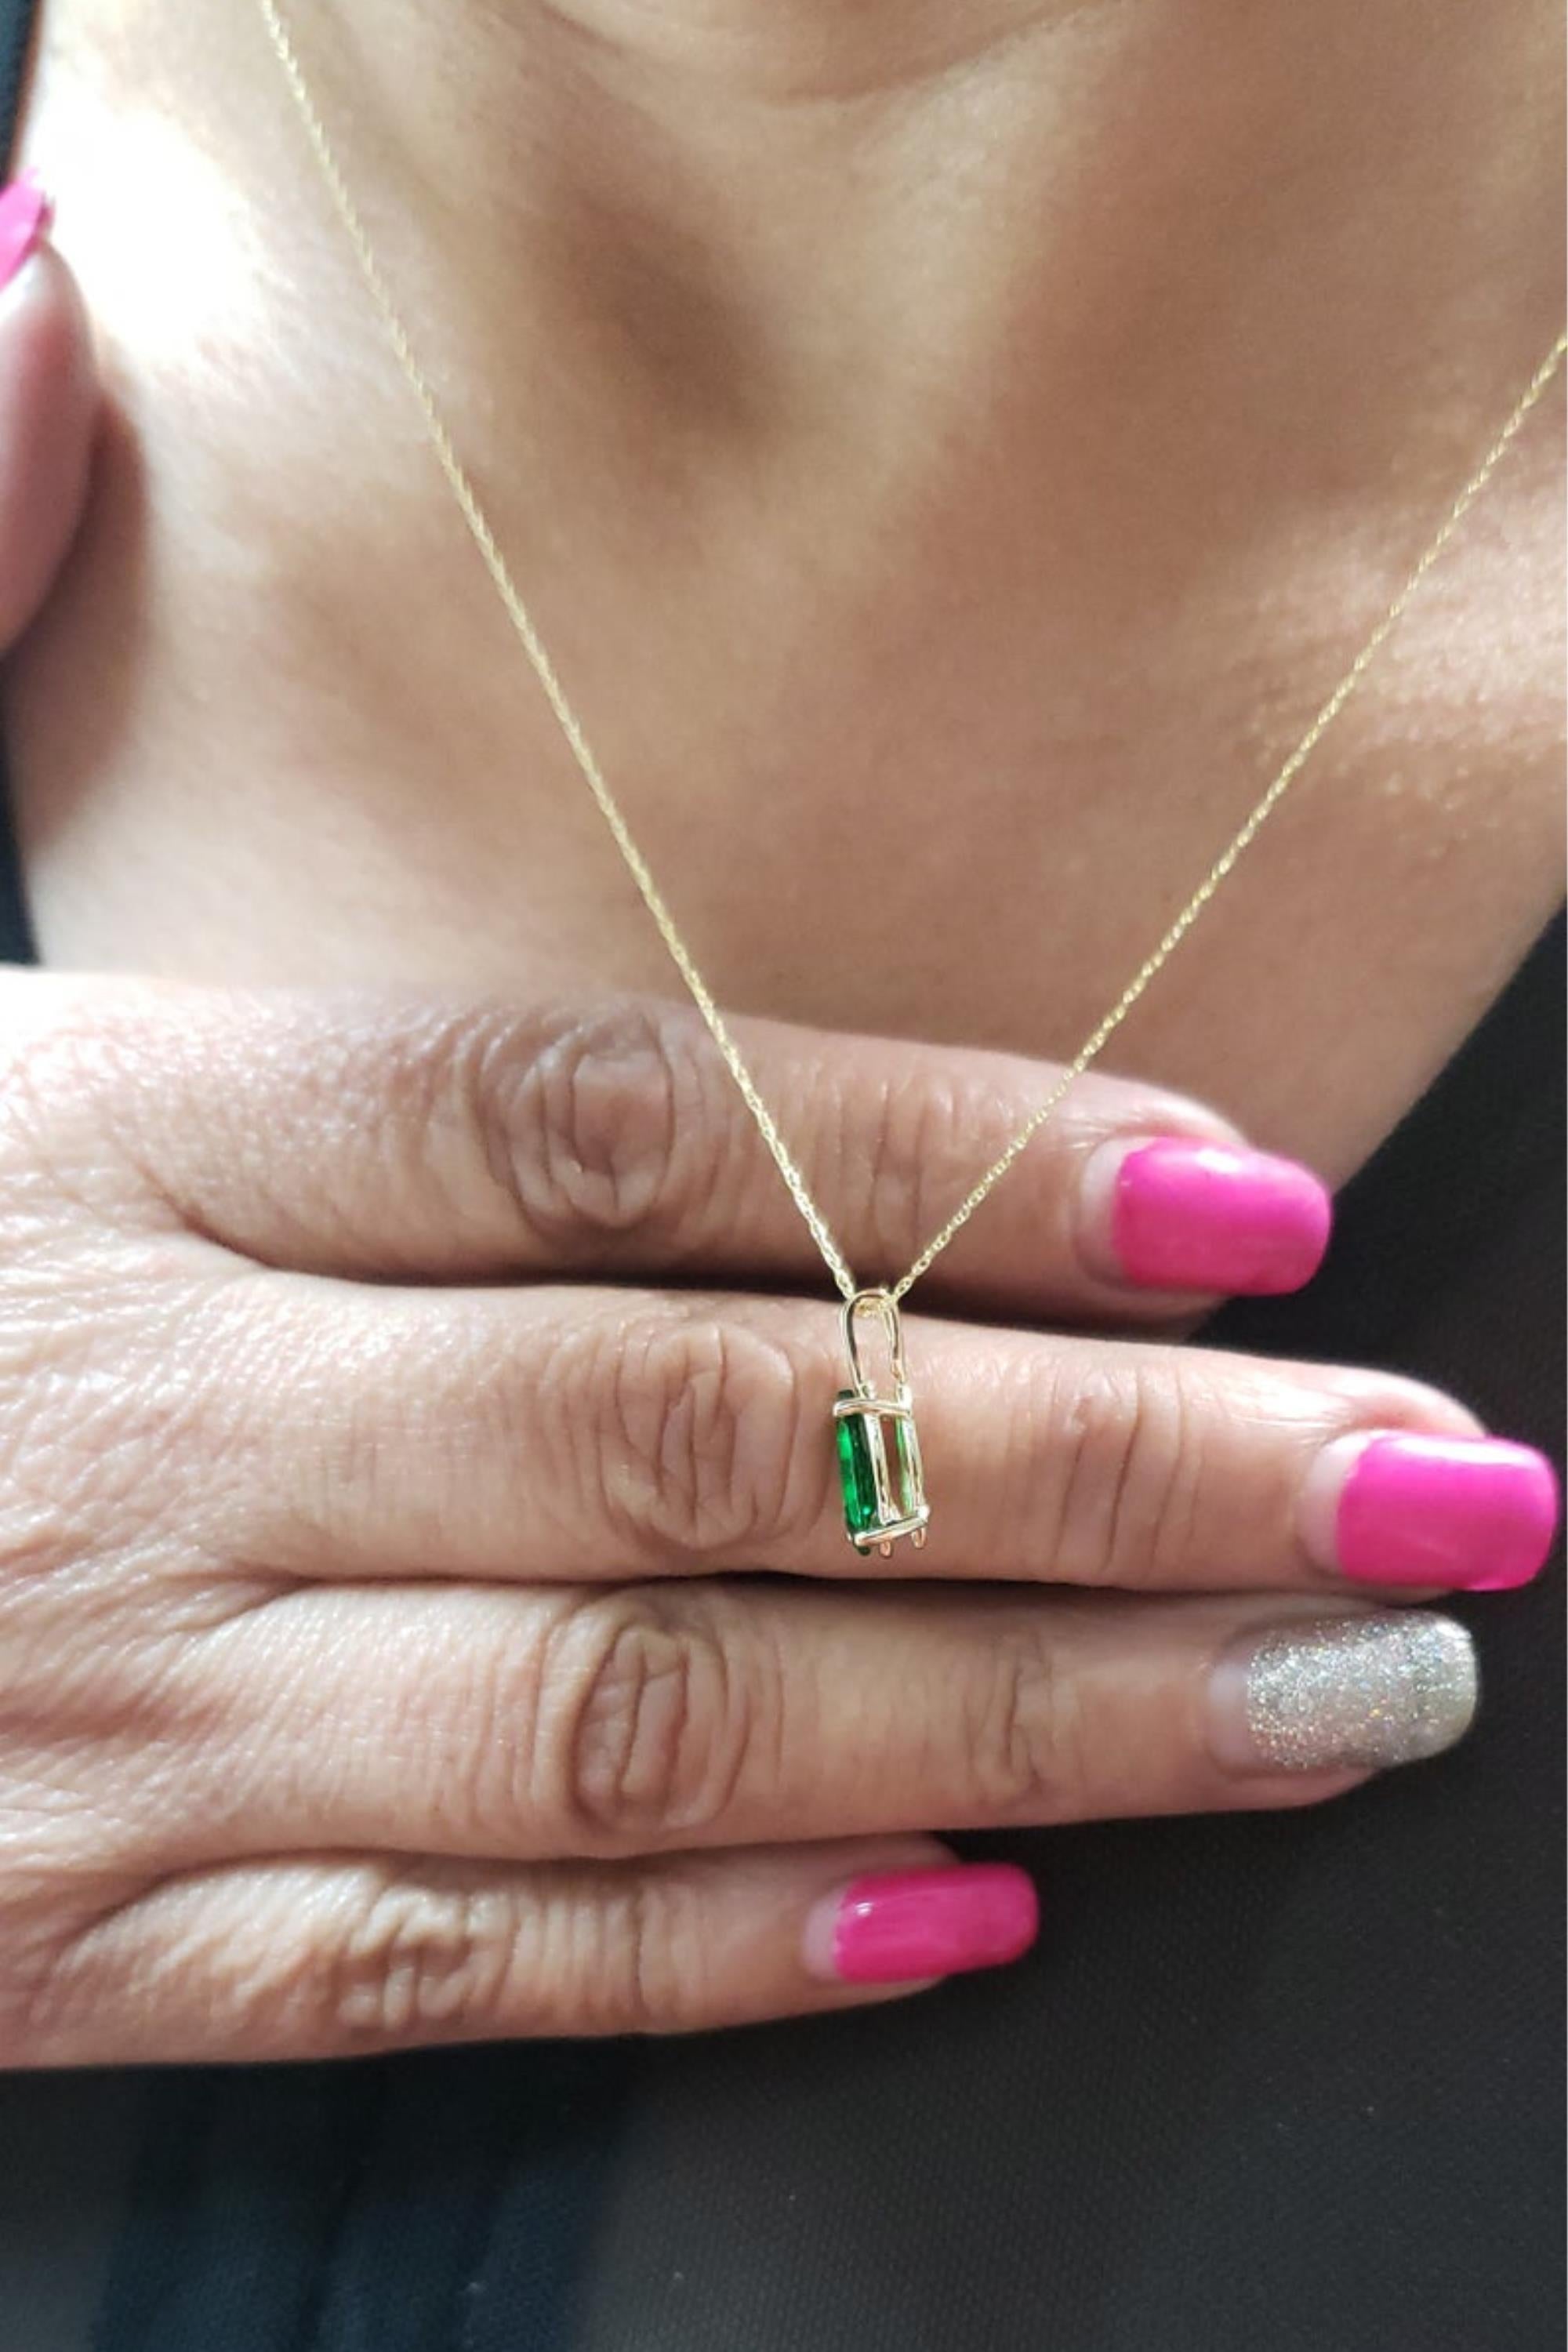 14Kt Gold Emerald Marquise Pendant Necklace